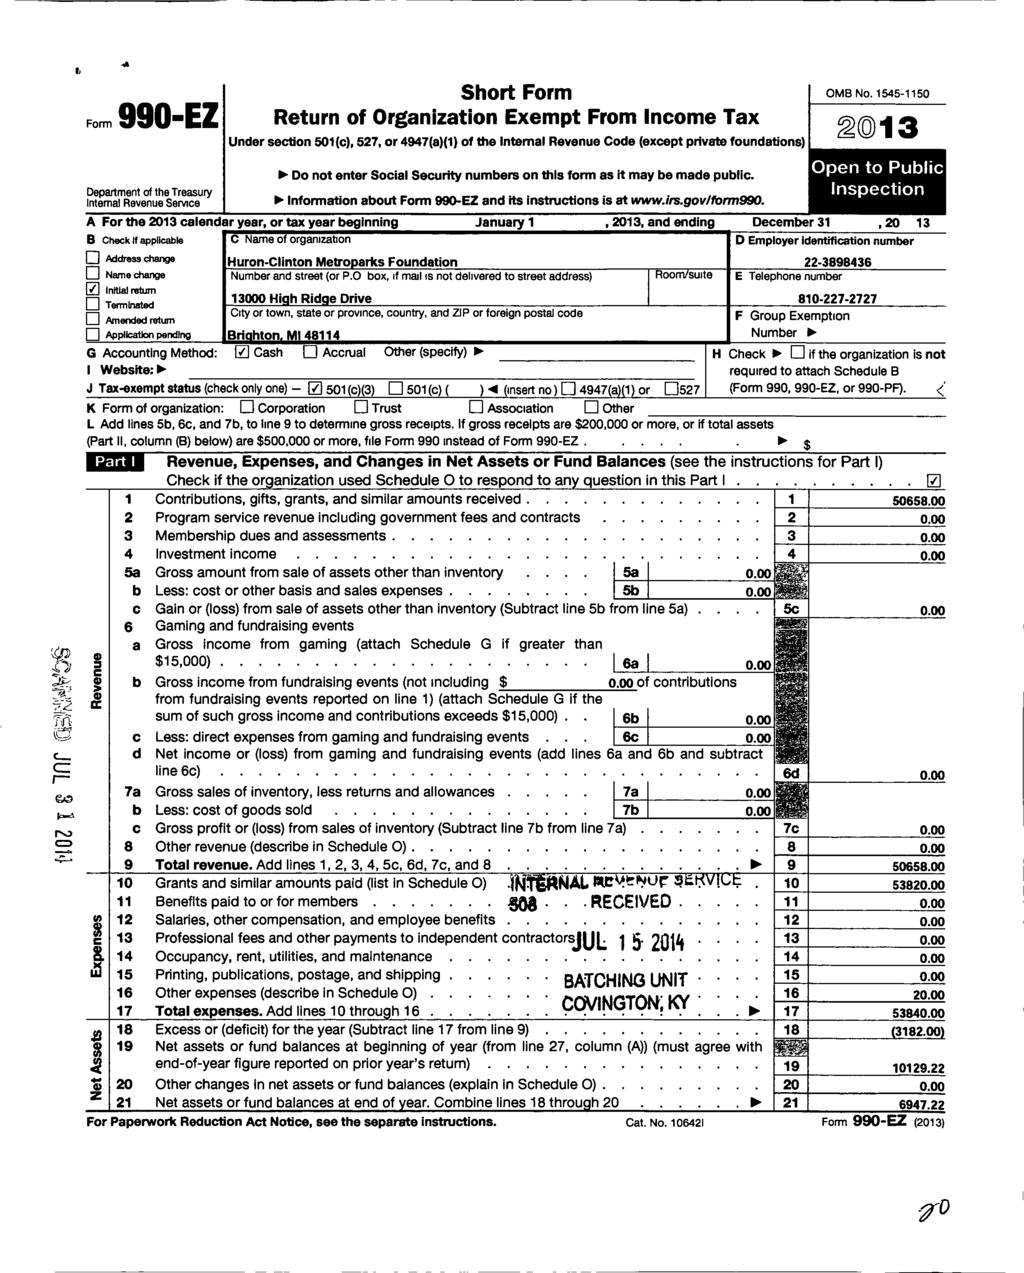 11, Form 990-EZ Short Form Return of Organization Exempt From Income Tax Under section 501(c), 527, or 4947(a)(1) of the Internal Revenue Code (except private foundations) OMB No.